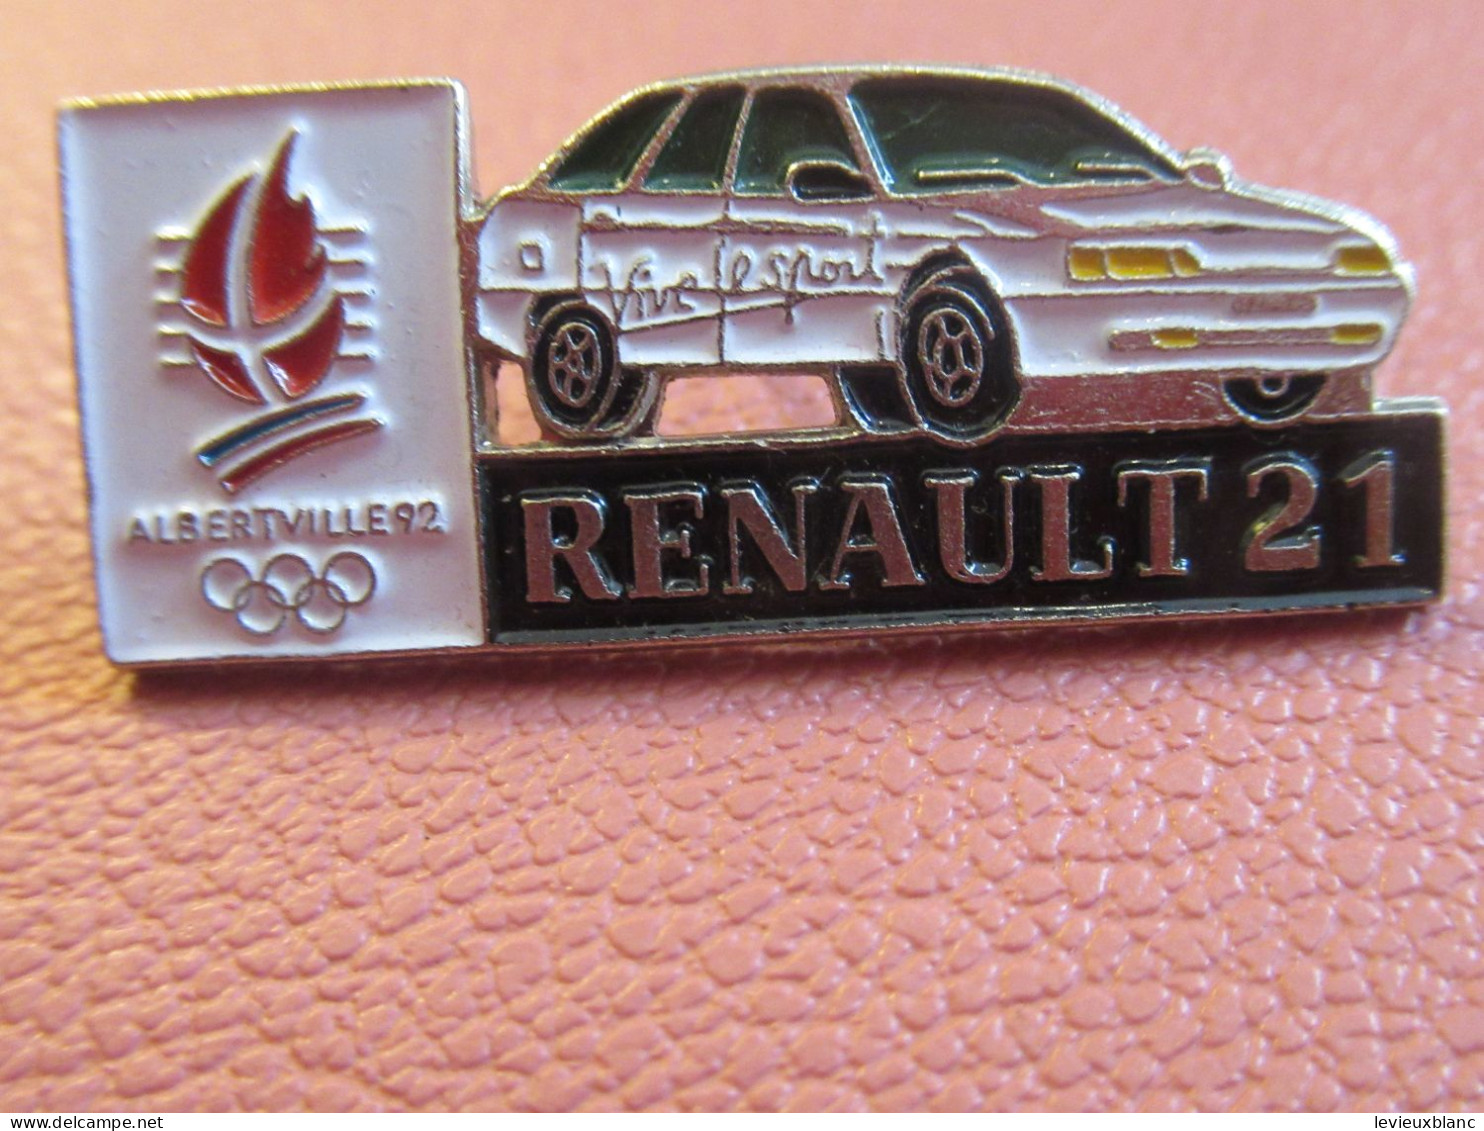 France/ " ALBERVILLE 92 Renault 21 " /COJO 91 /RENAULT 21  / 1991   INS230 - Olympische Spiele